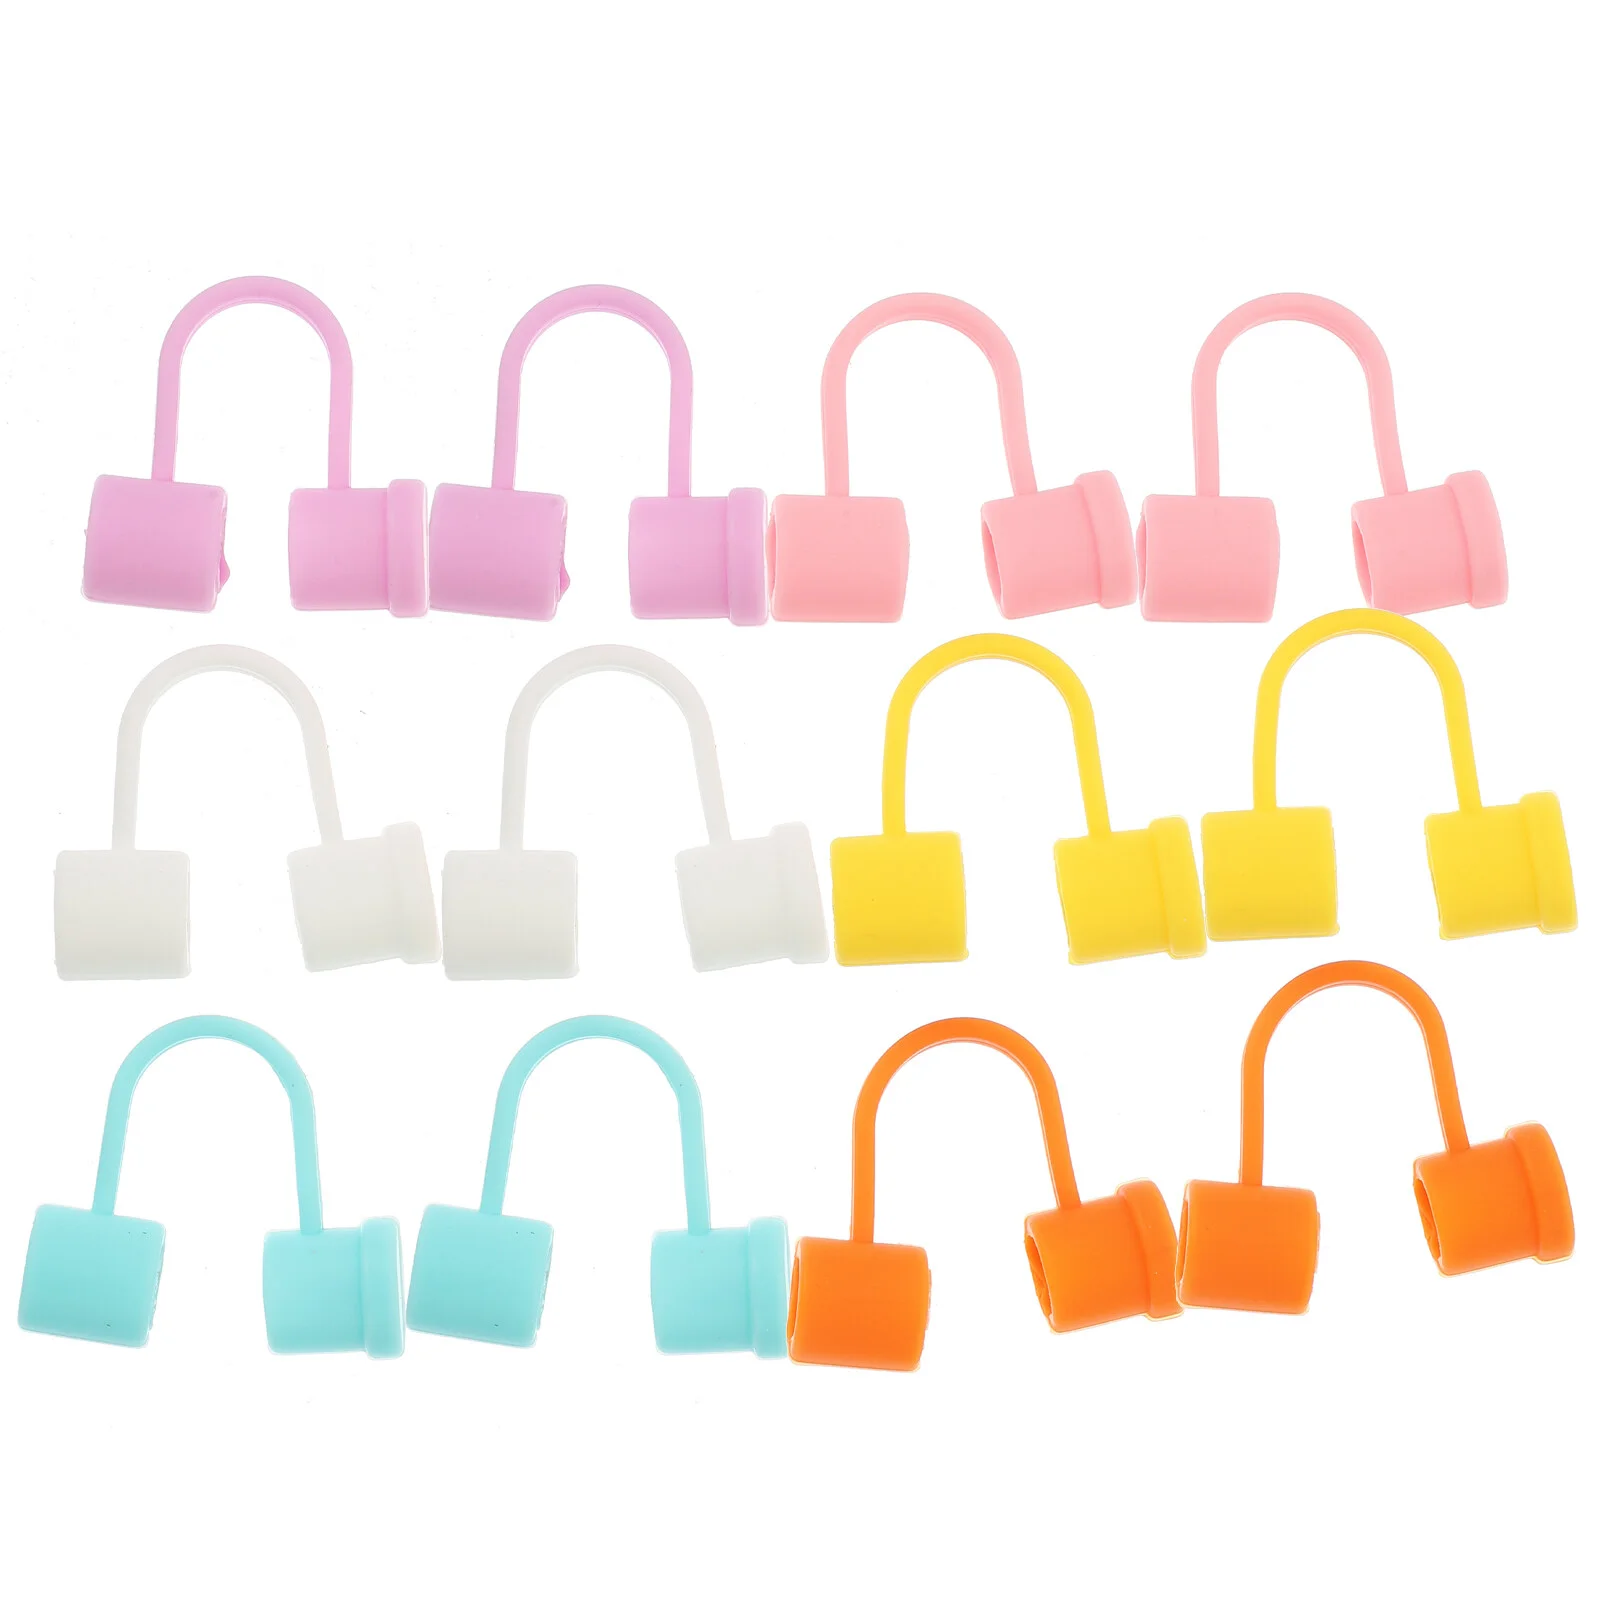 

12 Pcs Tumbler Straw Silicone Tips Cute Reusable Straws Covers Caps Silica Gel Protection Drinking Toppers